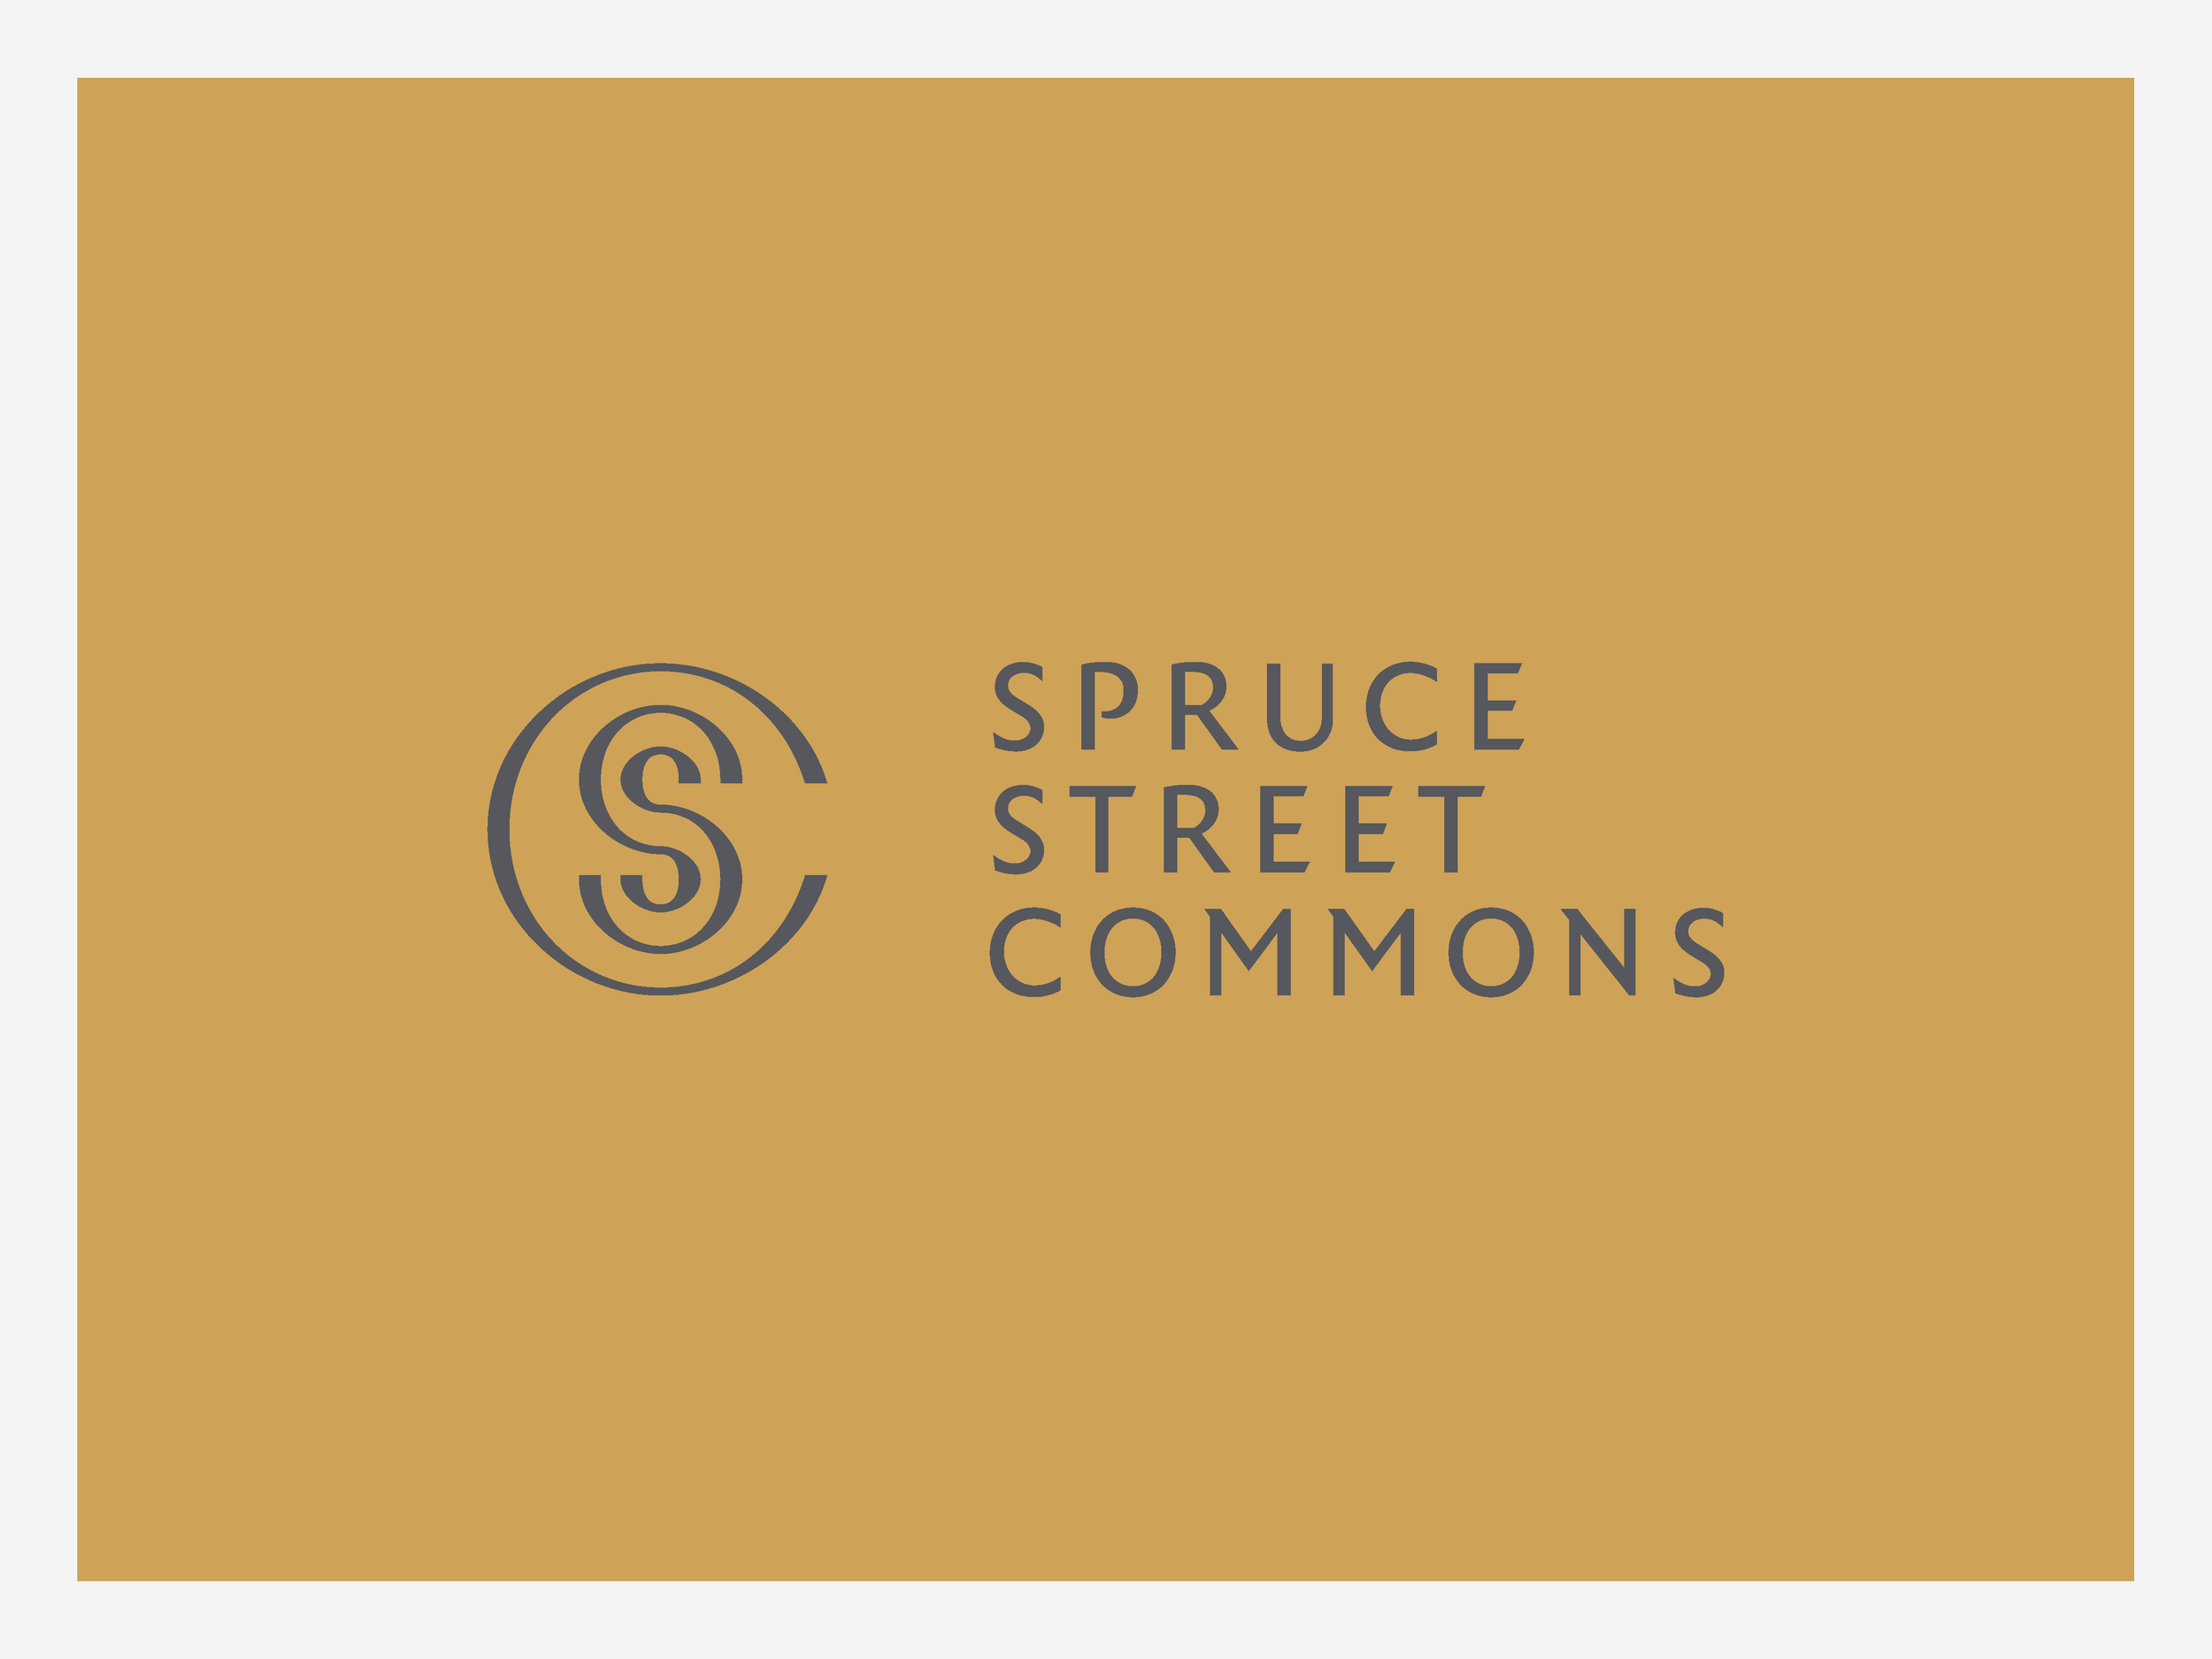 31 Spruce Street Commons logo lockup.png